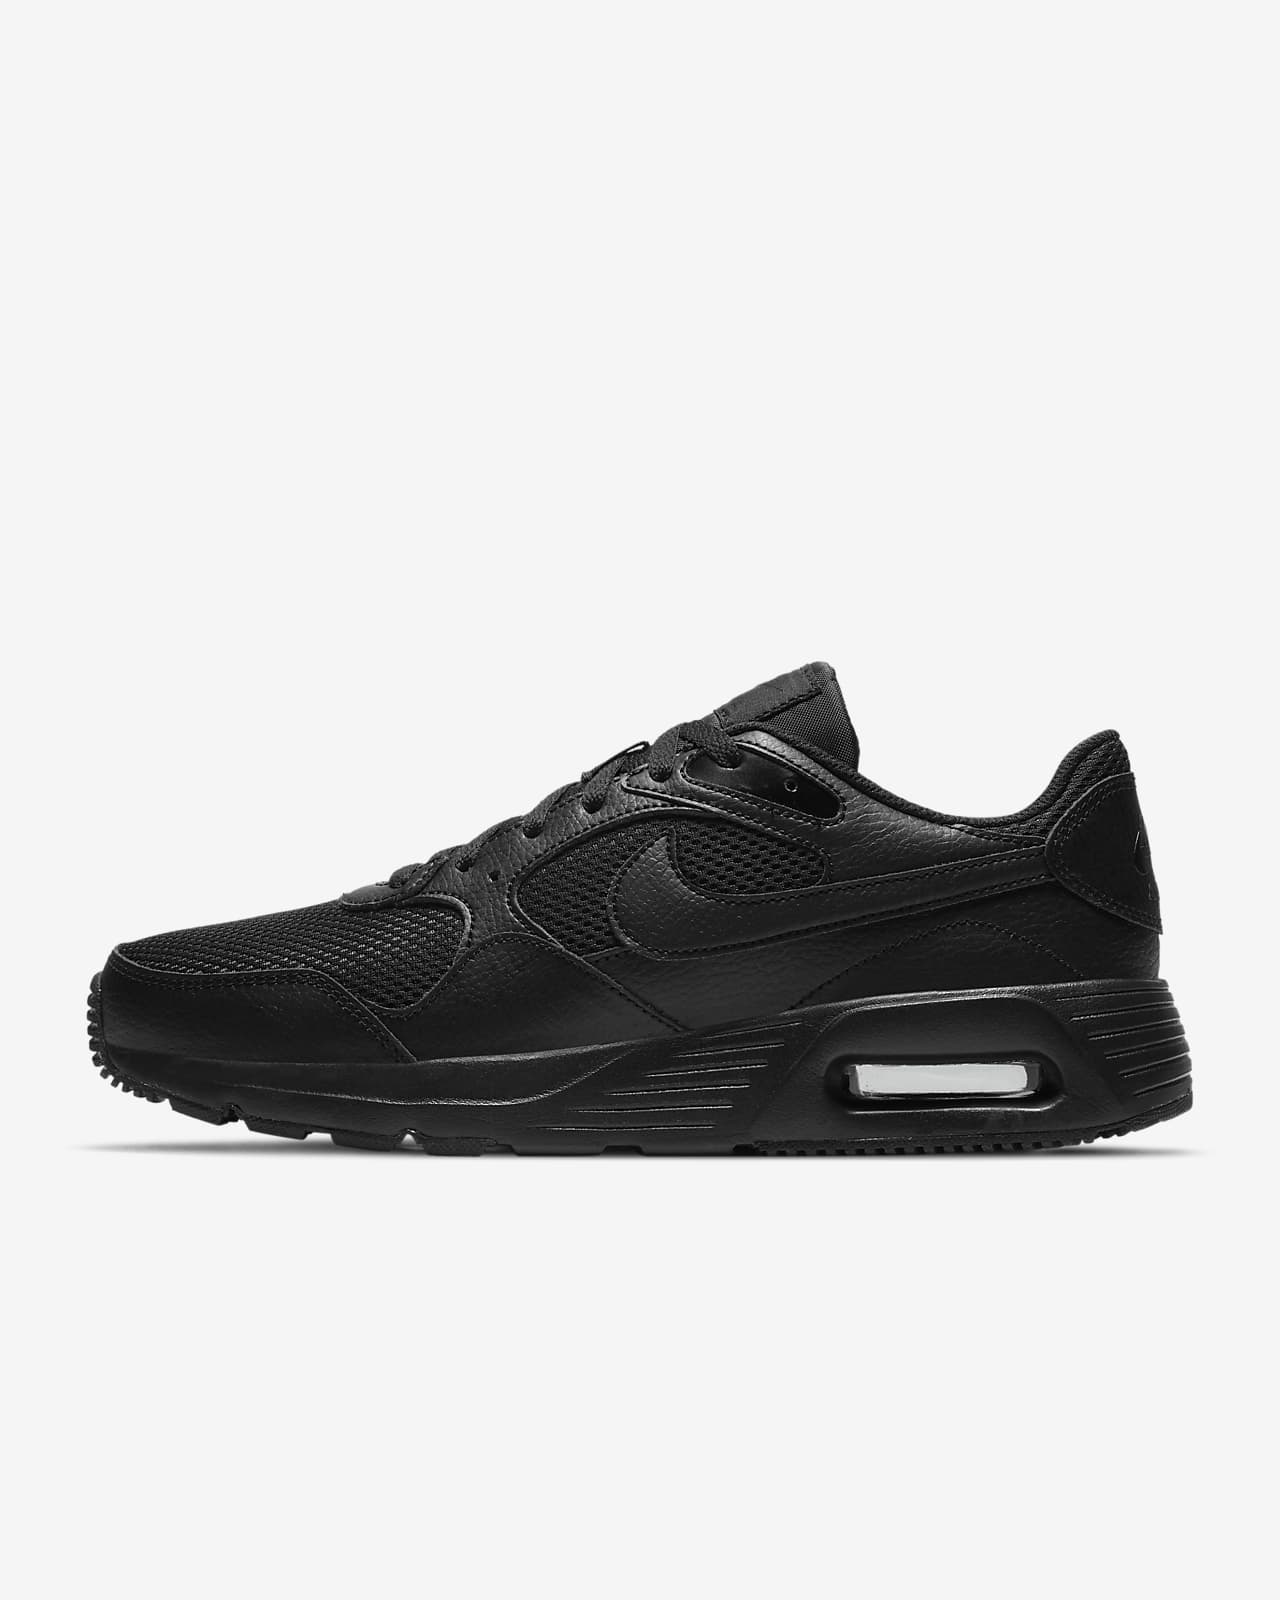 air max 90 bianche nere